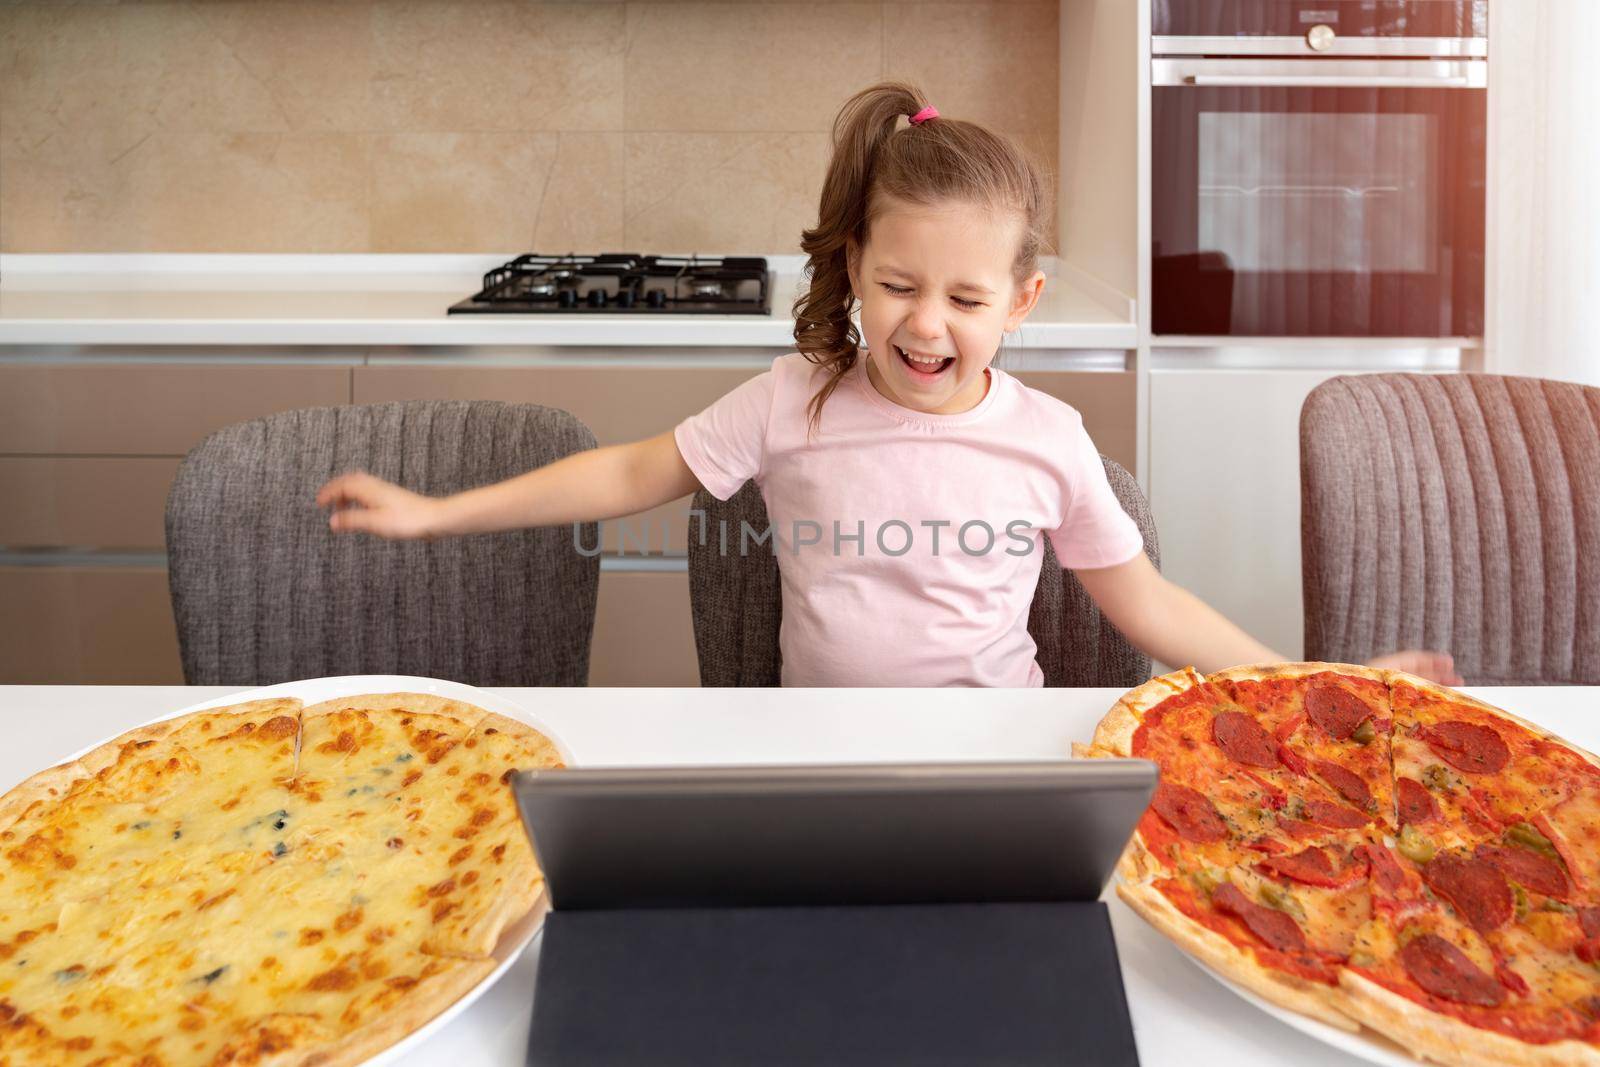 A little girl sitting at a table with a plate of pizza. High quality photo